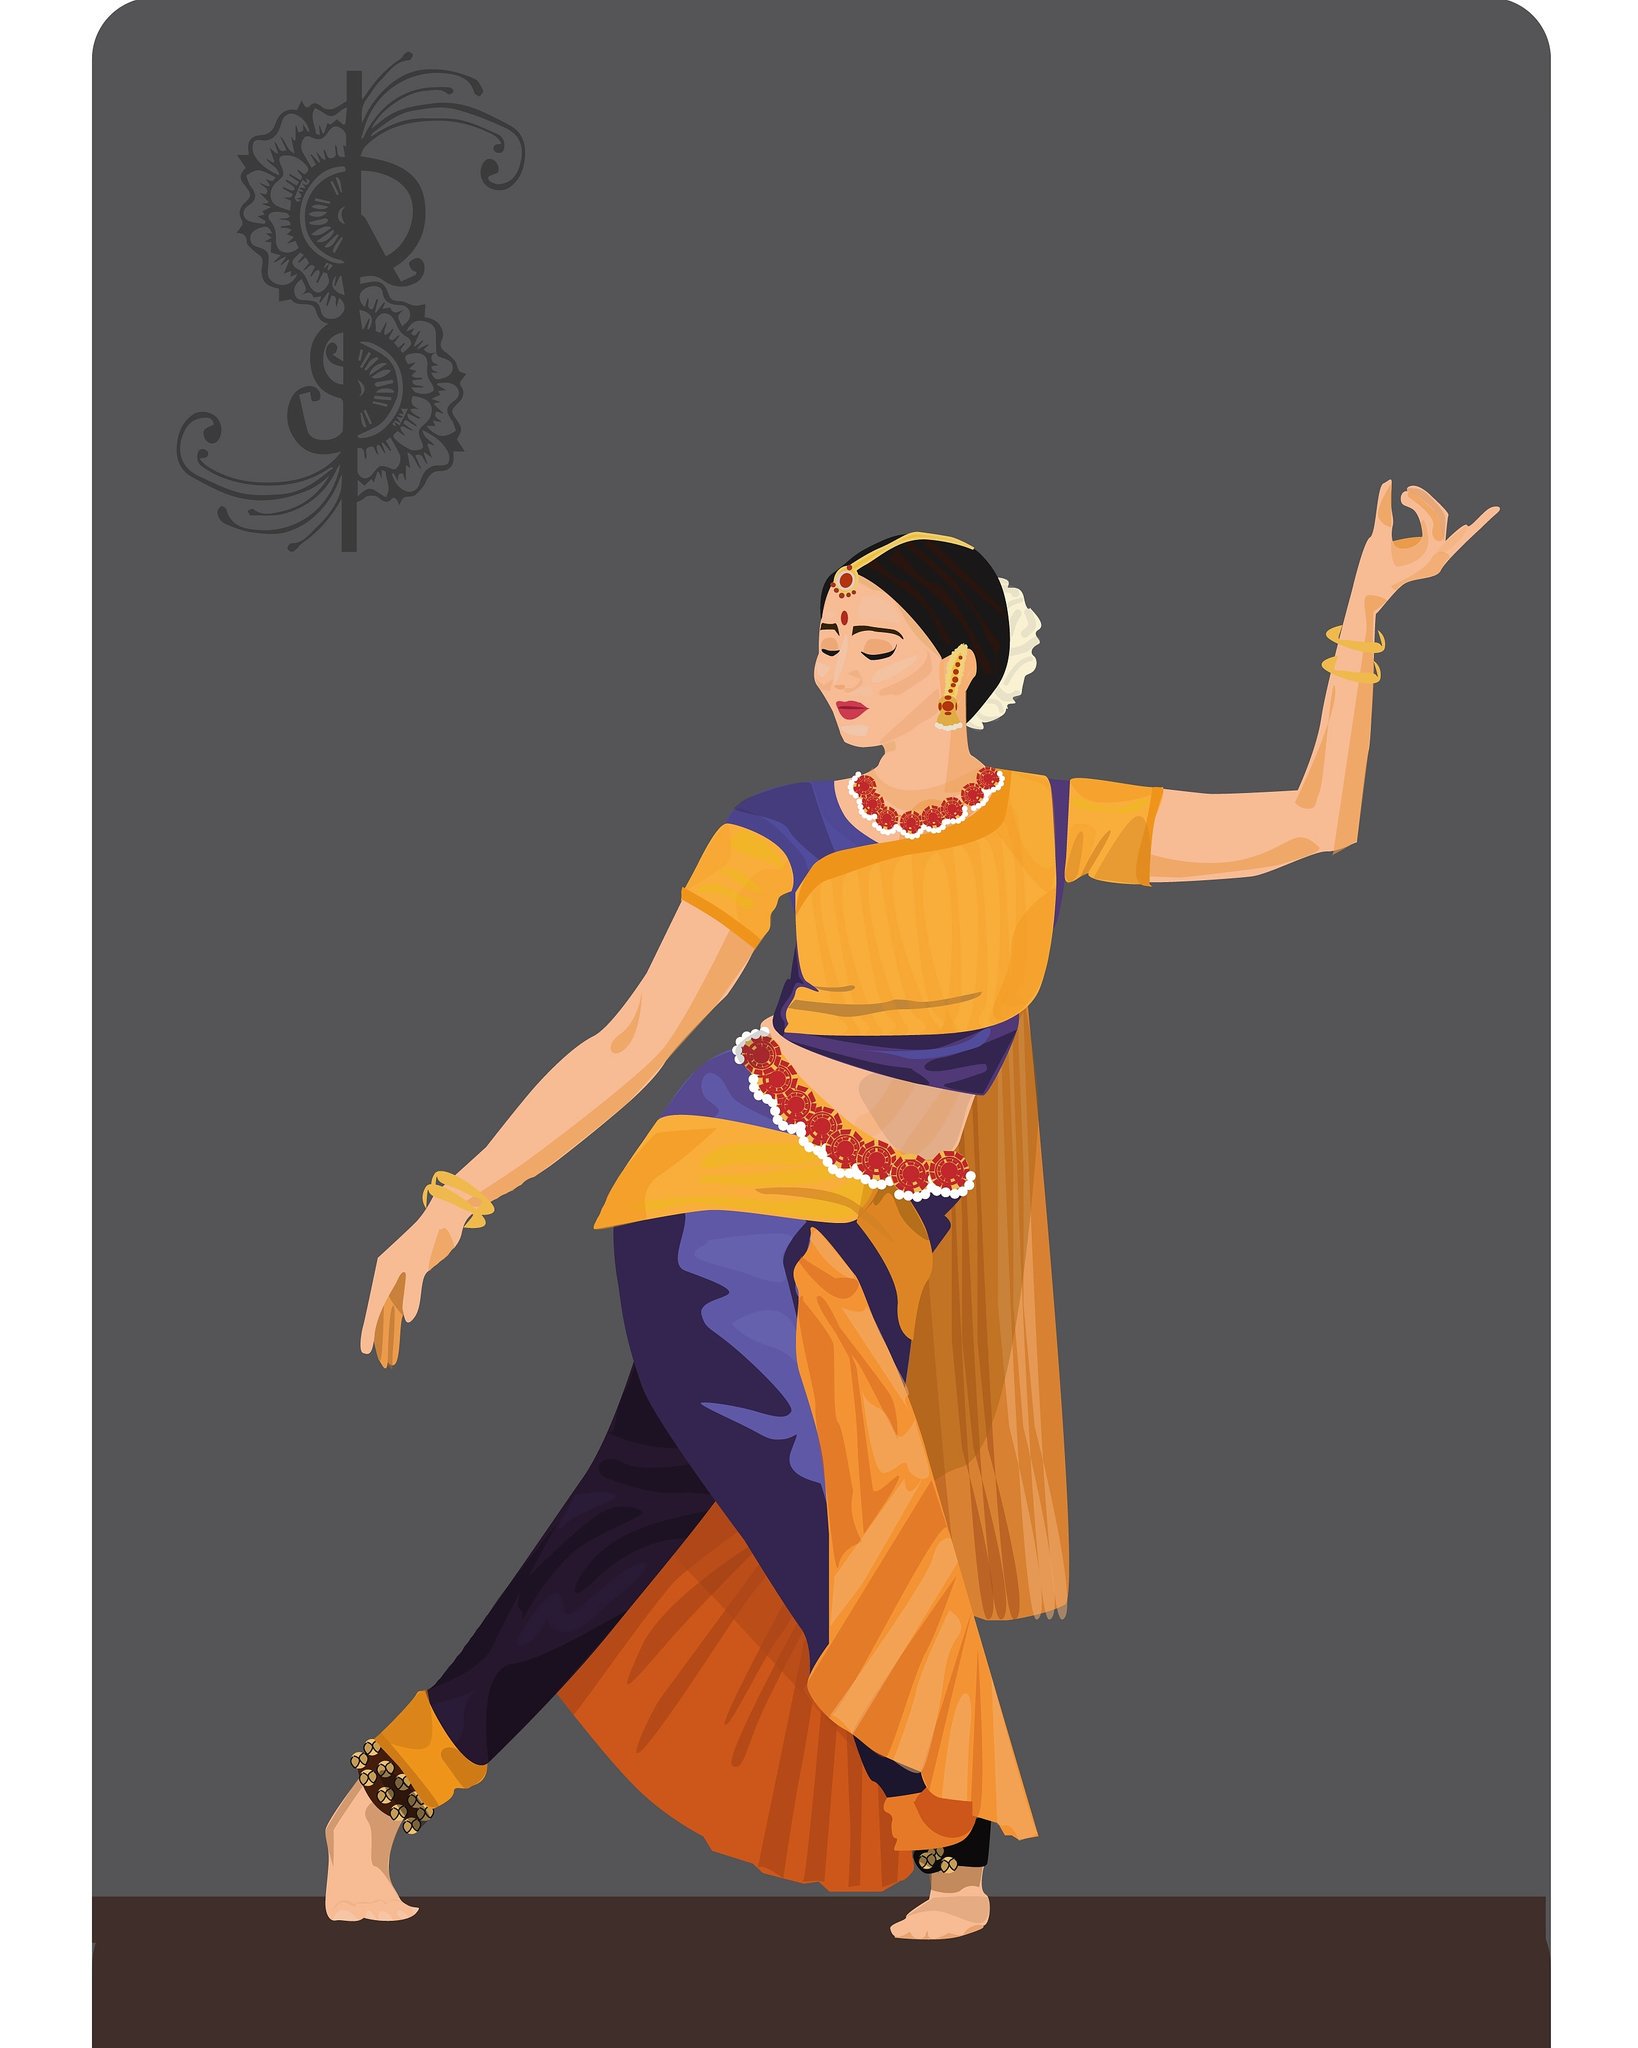 Ananya Nidamangala Srinivasa 🏳️‍🌈 в Twitter: „So I did a series of  Illustrations of Bharatanatyam dancers I've seen and been inspired by, and  here are the ones that I've completed. More to